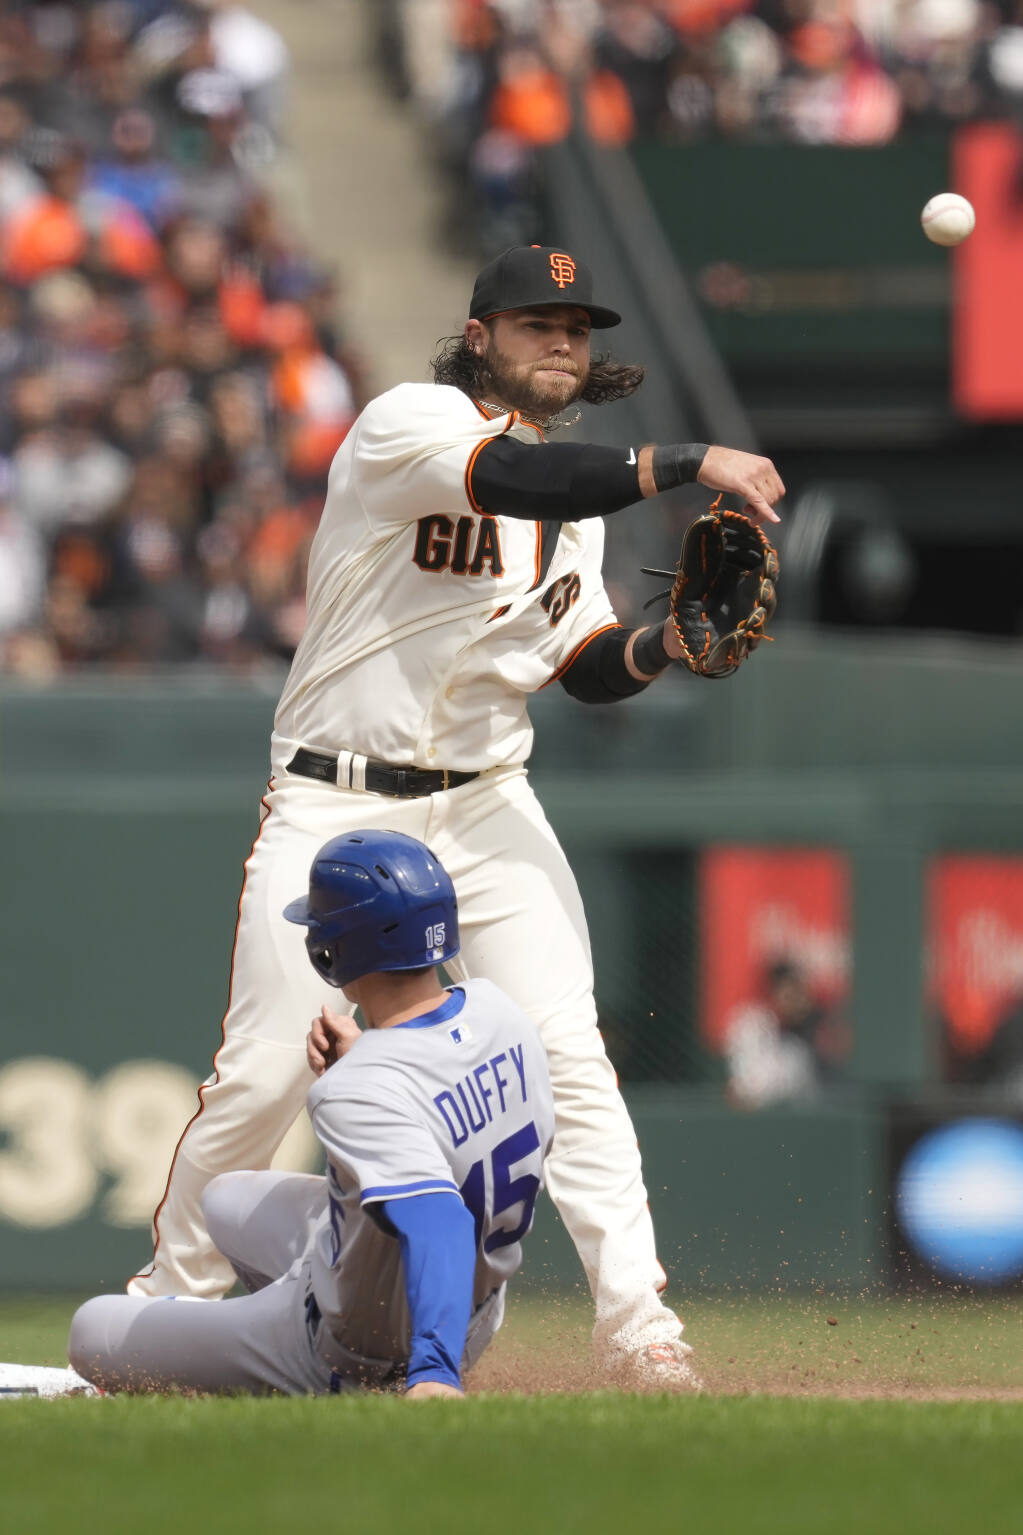 Giants' 9th-inning rally comes up short in home-opening loss to Royals